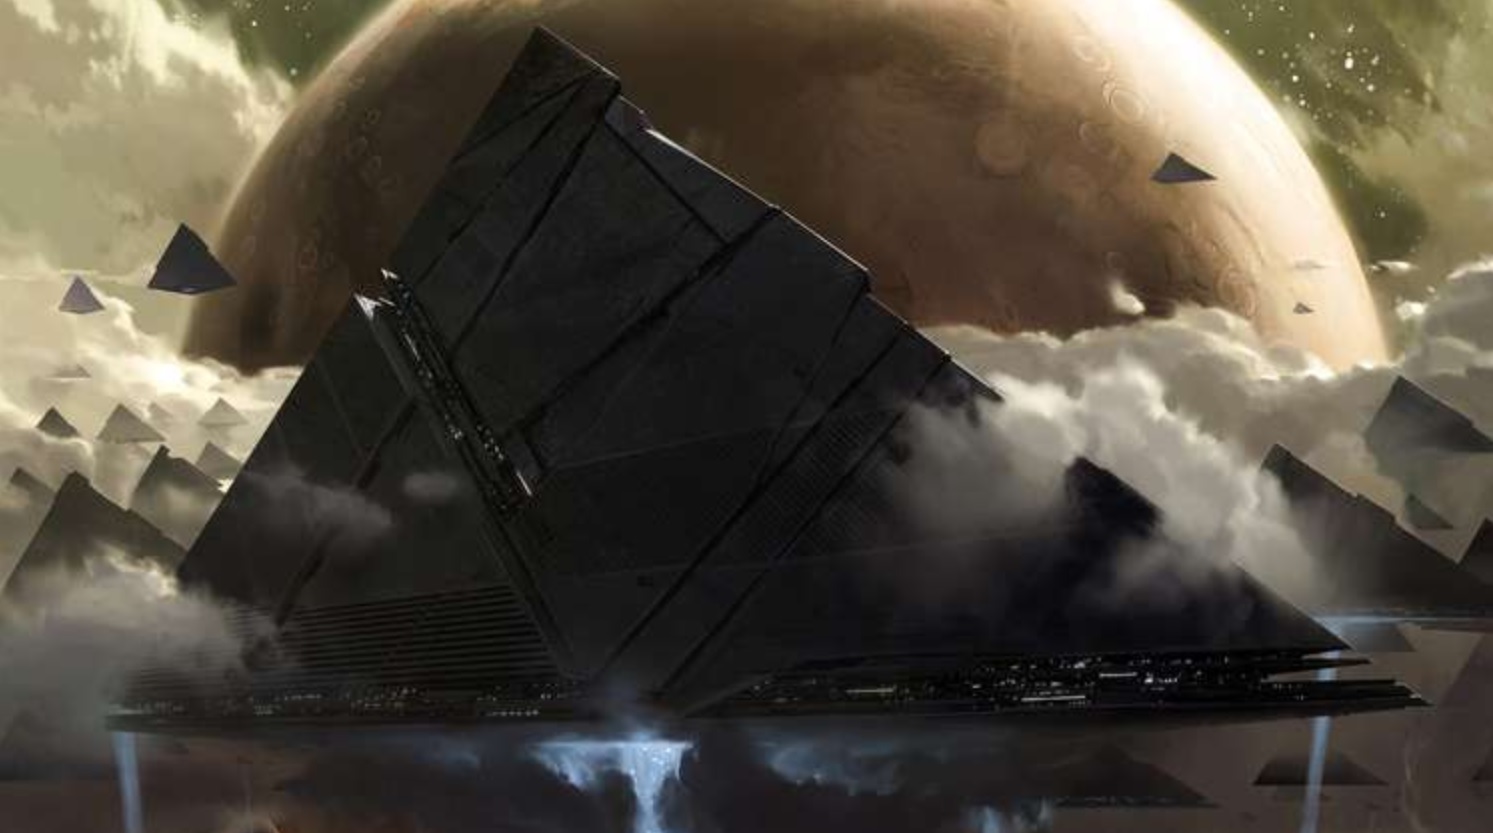 Concept art of The Darkness's pyramid shaped ships flying by a moon.